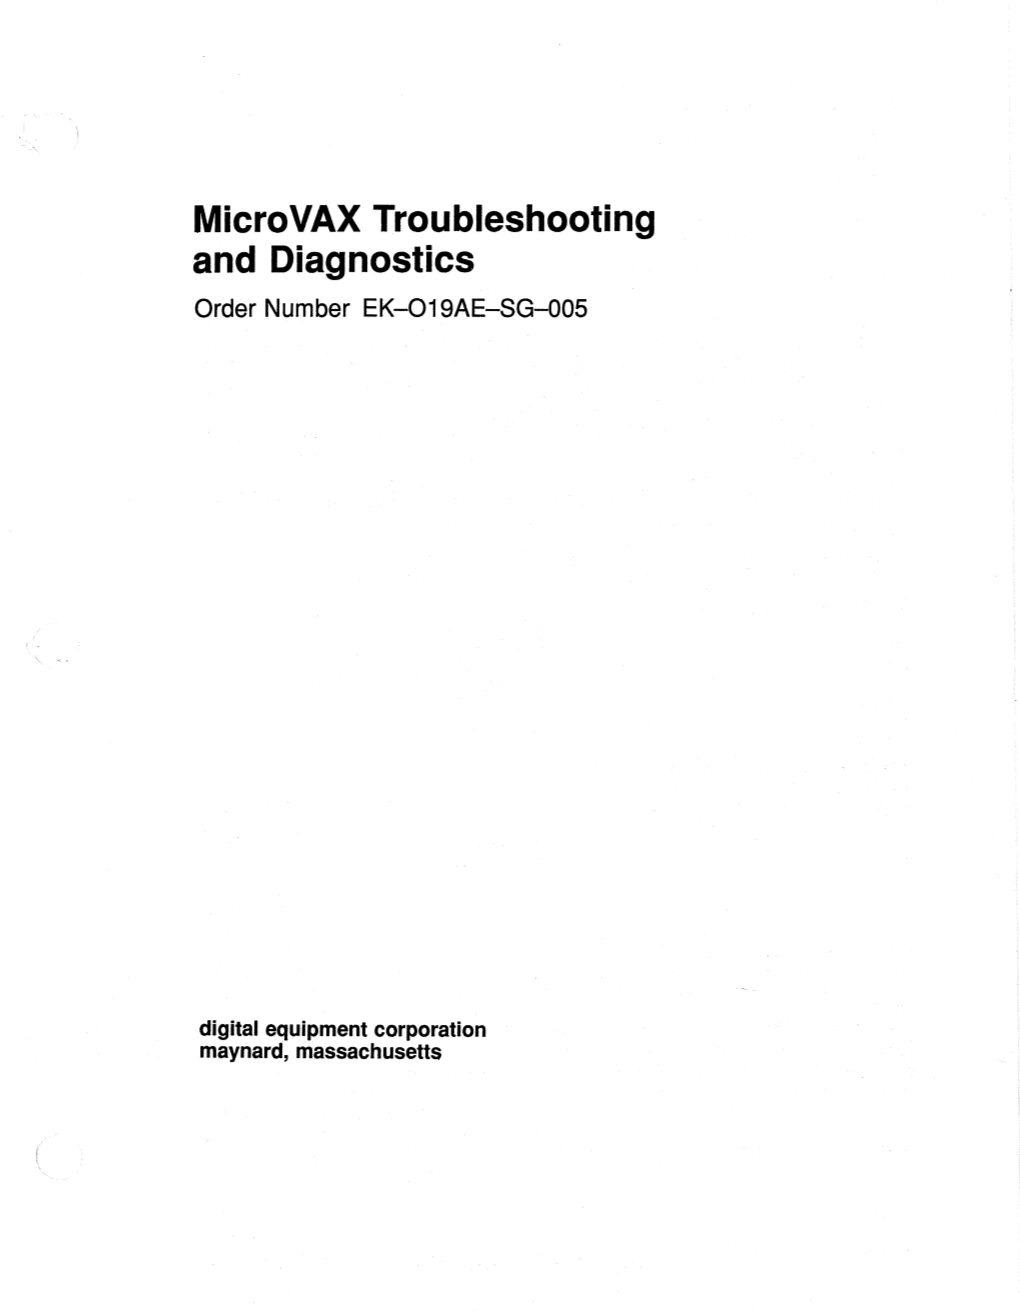 Microvax Troubleshooting and Diagnostics Order Number EK-019AE-SG-005